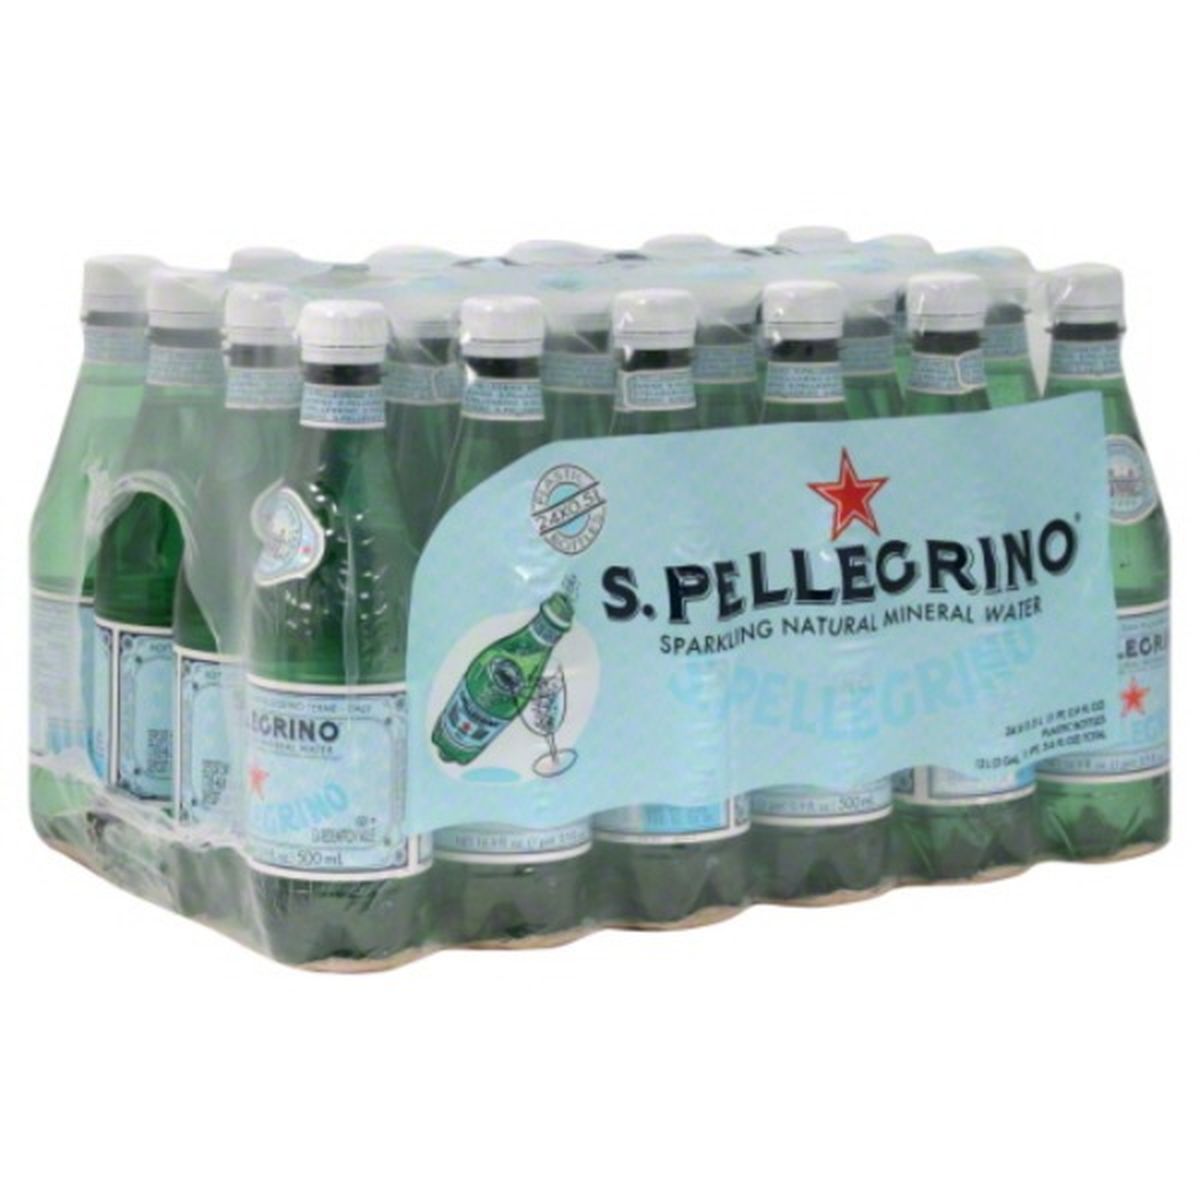 Calories in S.Pellegrino Sparkling Natural Mineral Water